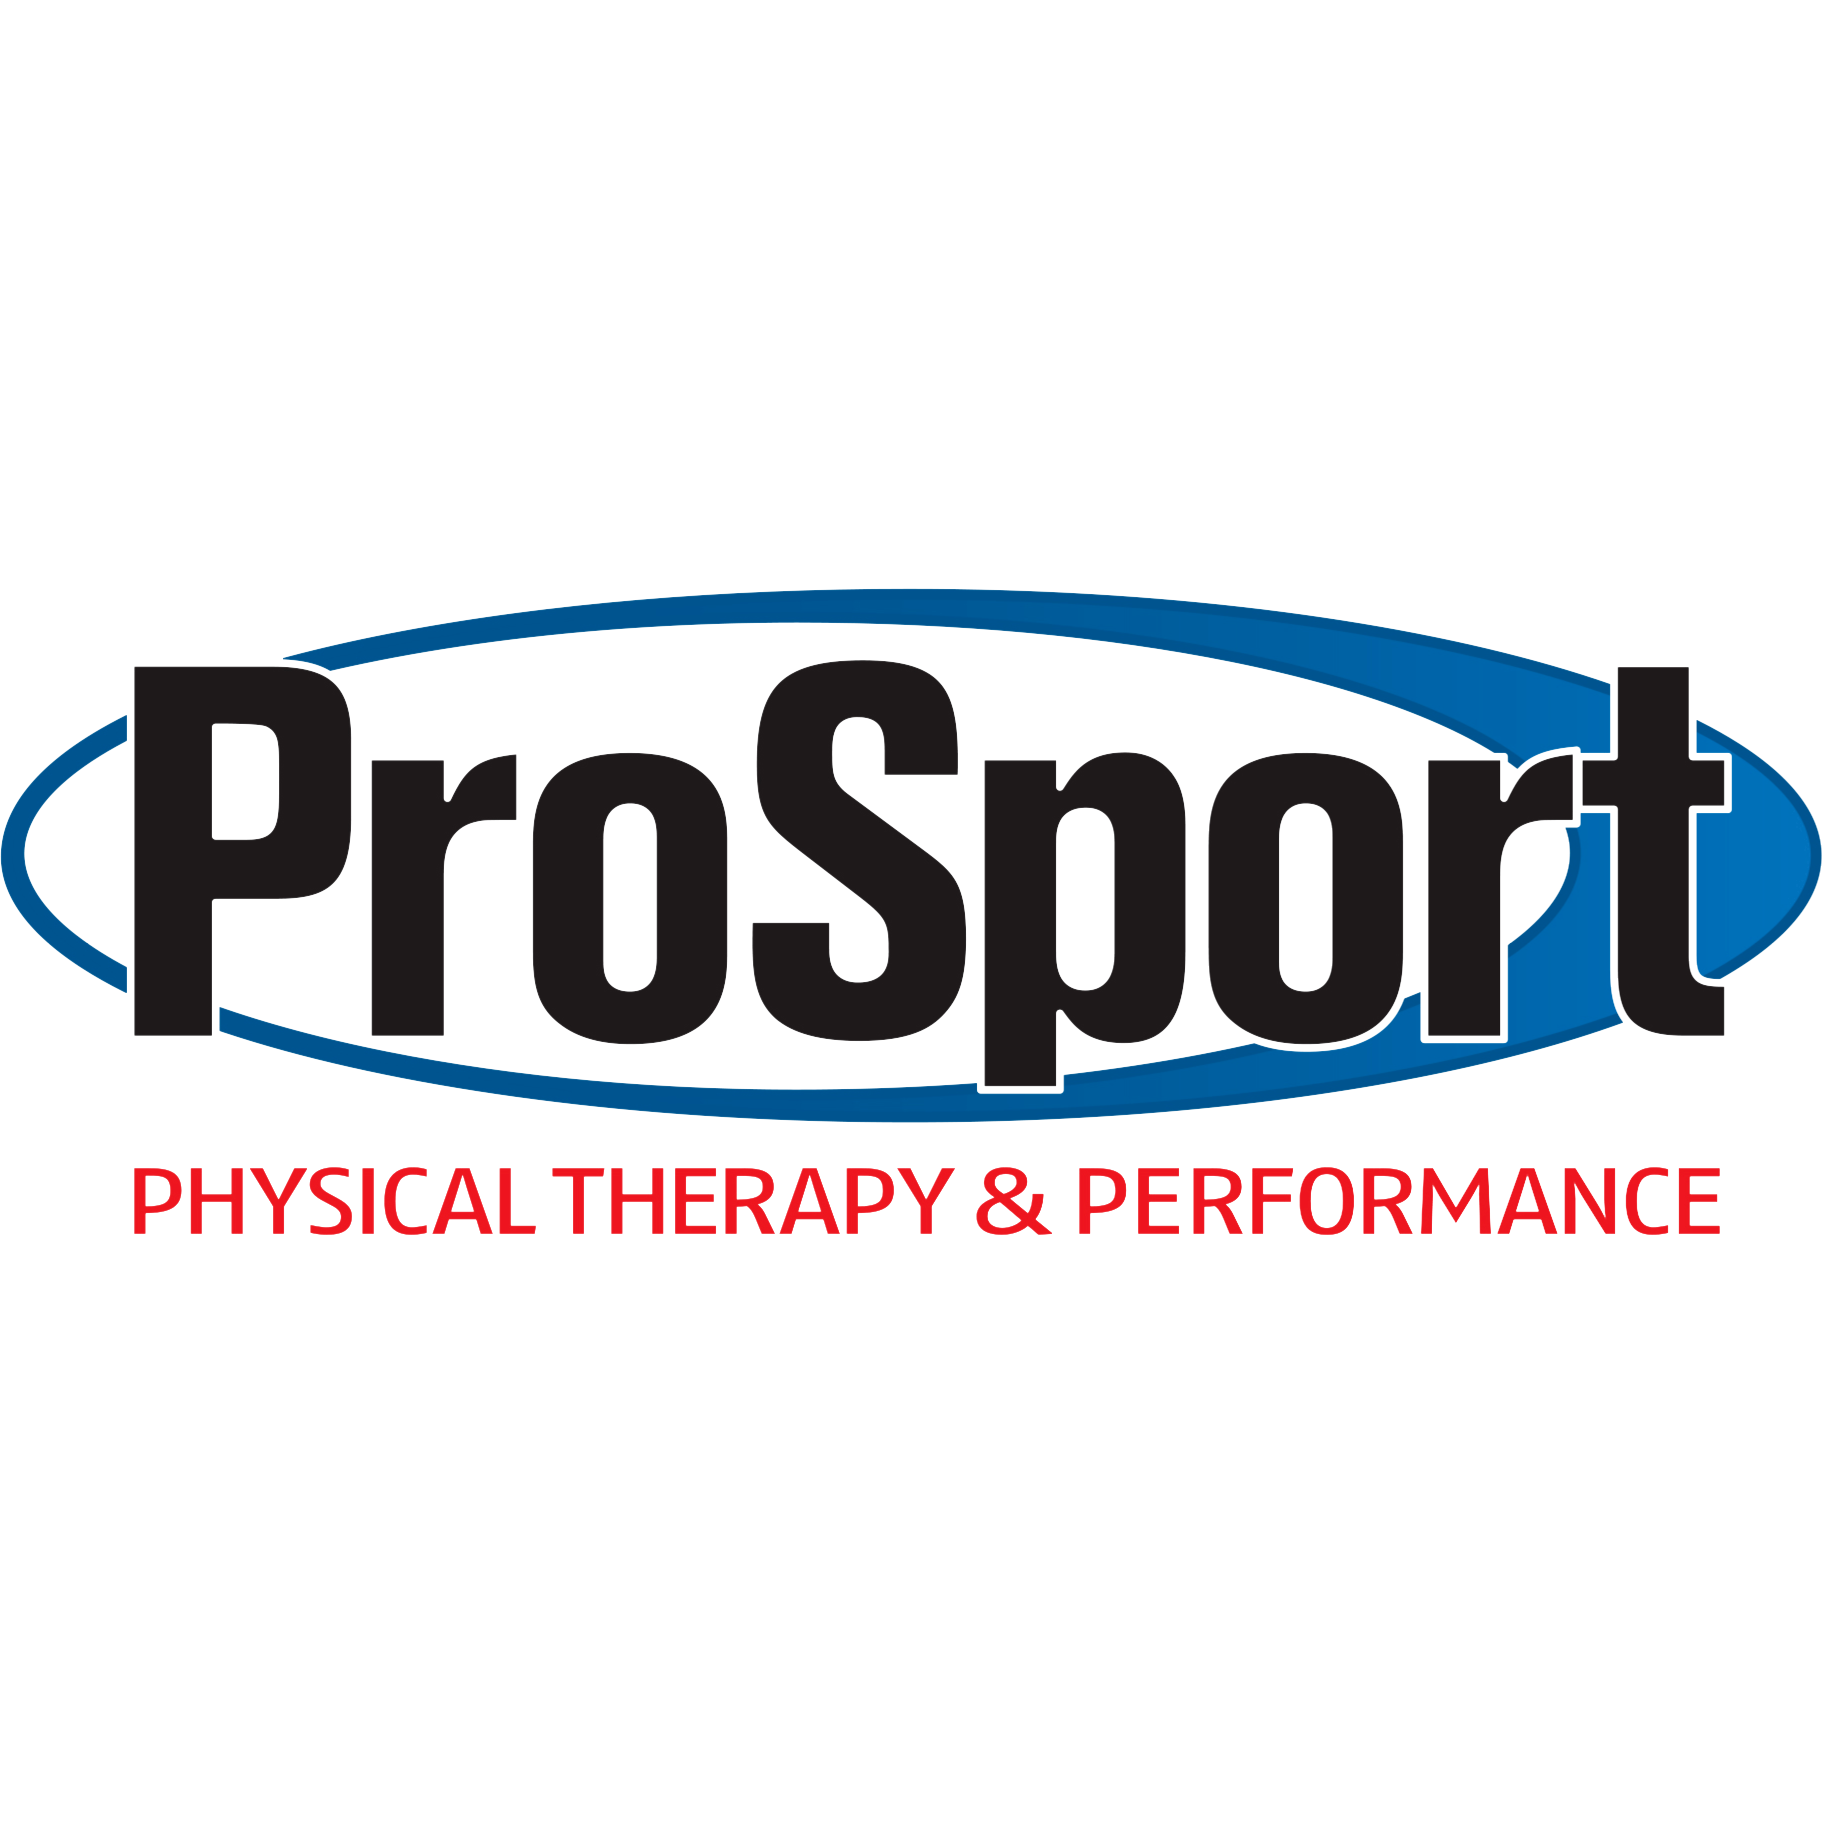 ProSport Physical Therapy & Performance - Torrance, CA 90501 - (310)870-3332 | ShowMeLocal.com